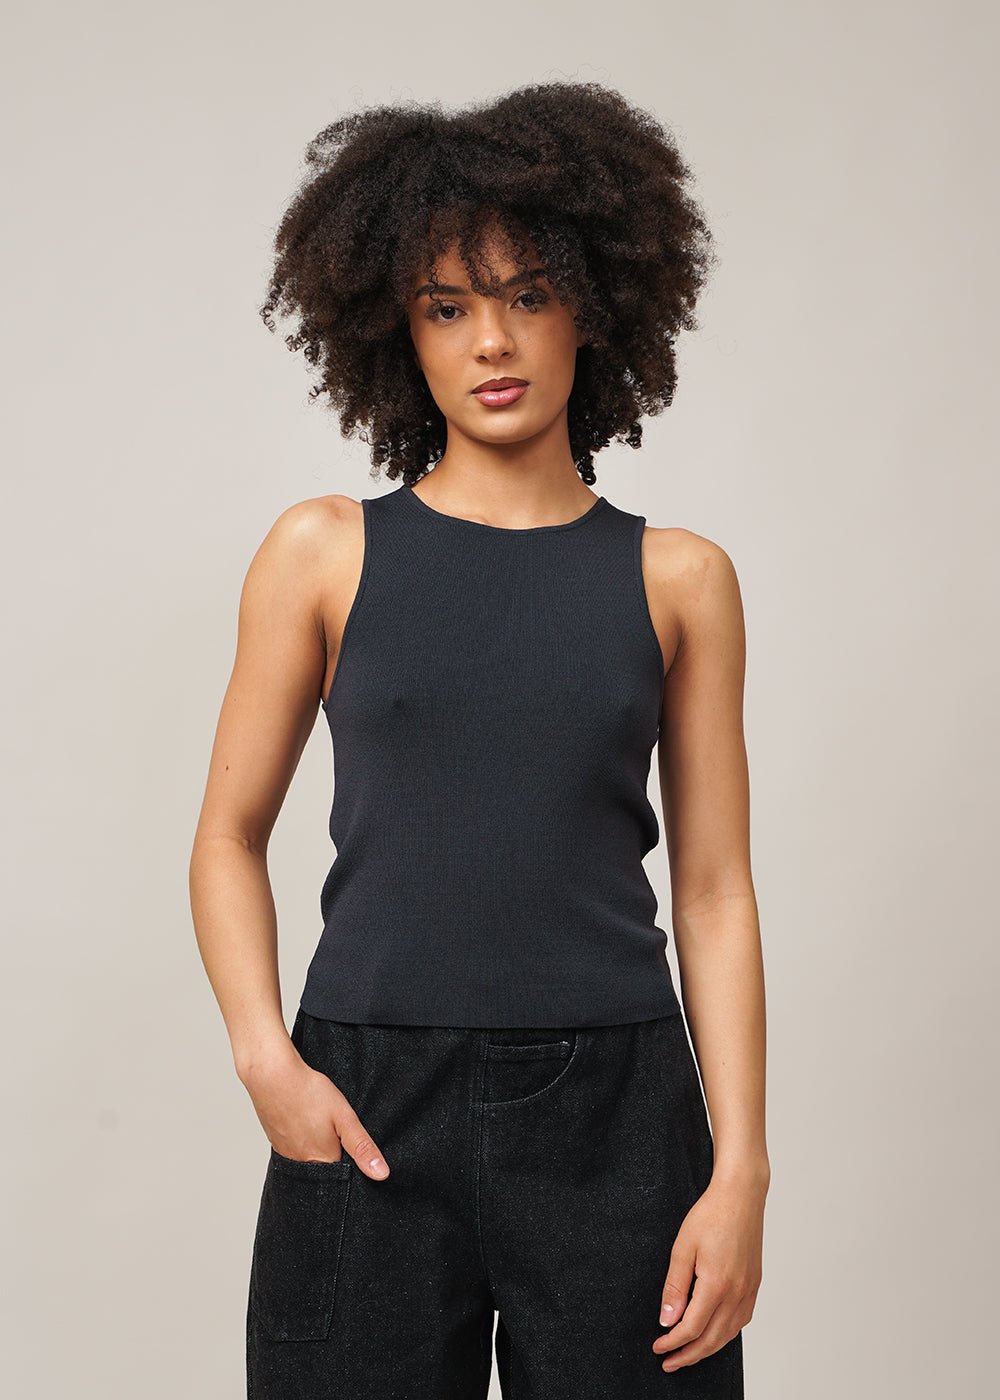 AMOMENTO Navy Cut-Out Sleeveless Top - New Classics Studios Sustainable Ethical Fashion Canada